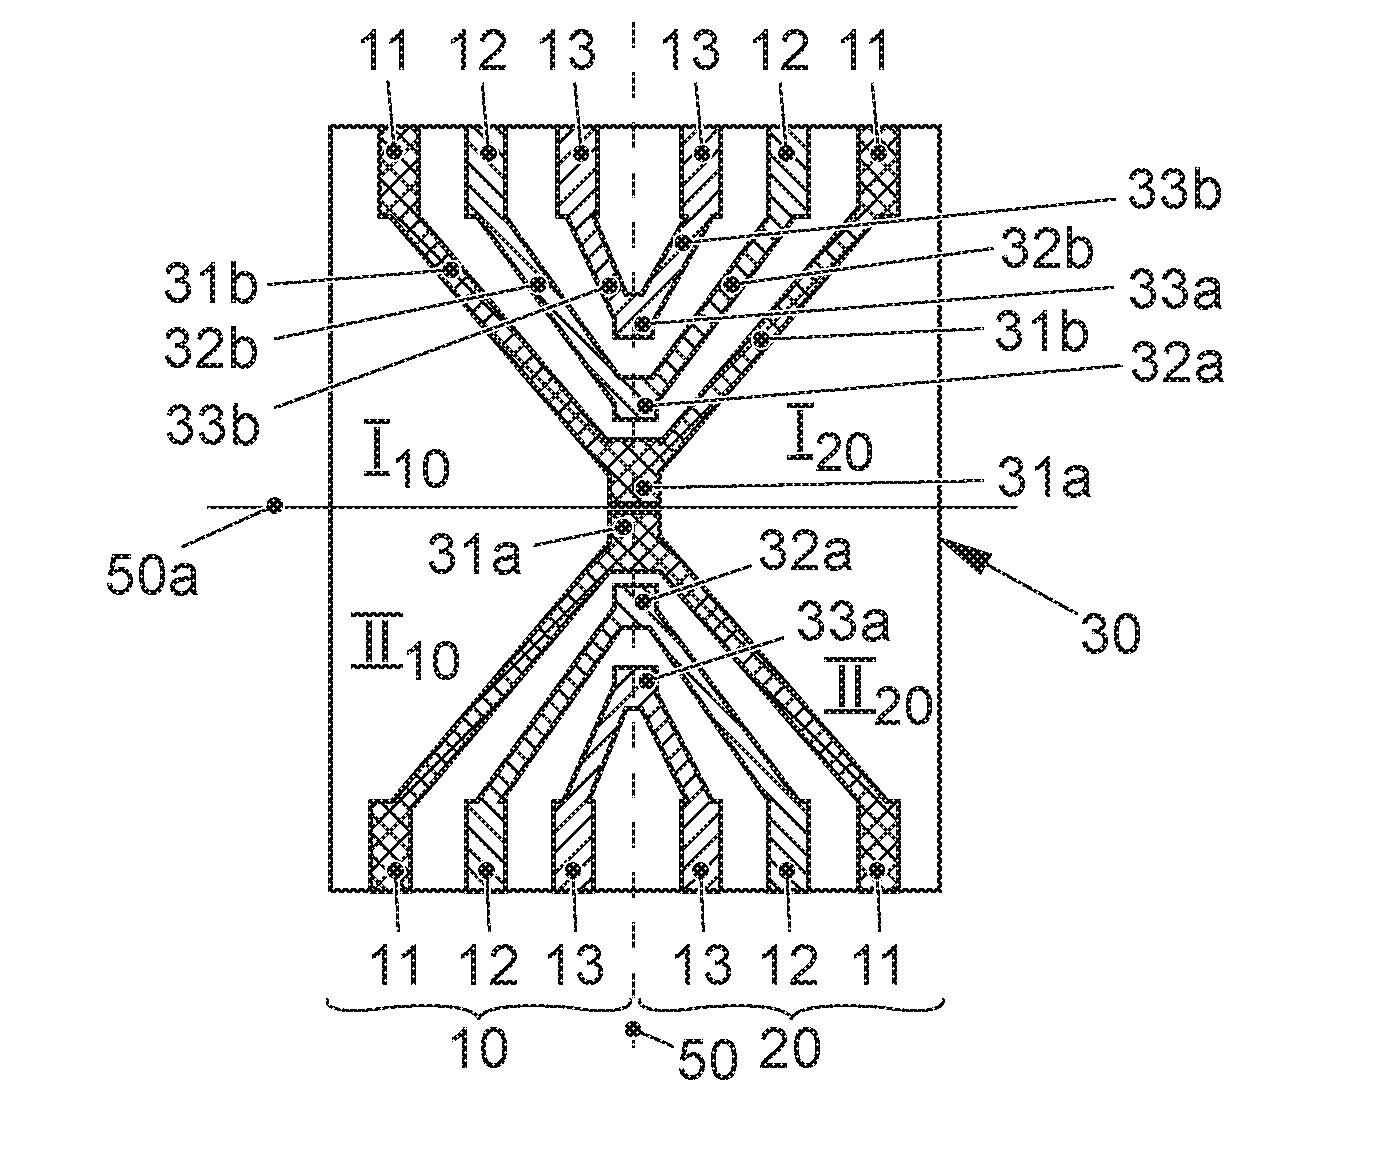 Fuel cell system including multiple fuel cell stacks